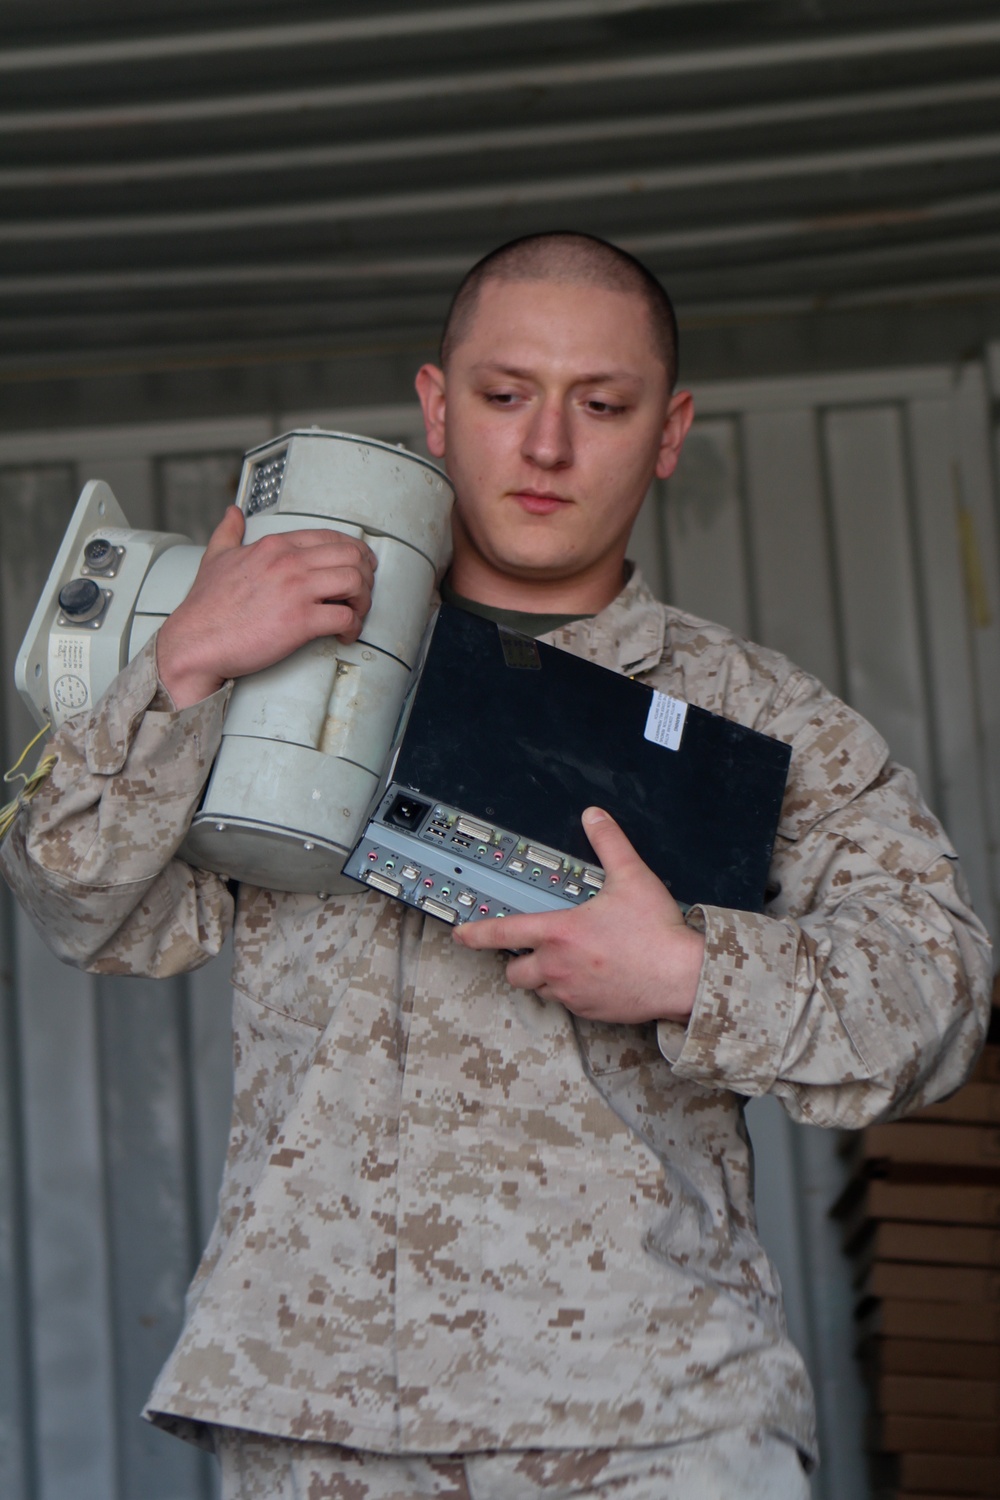 More than boots, blouses: I MHG supply gets job done in Helmand